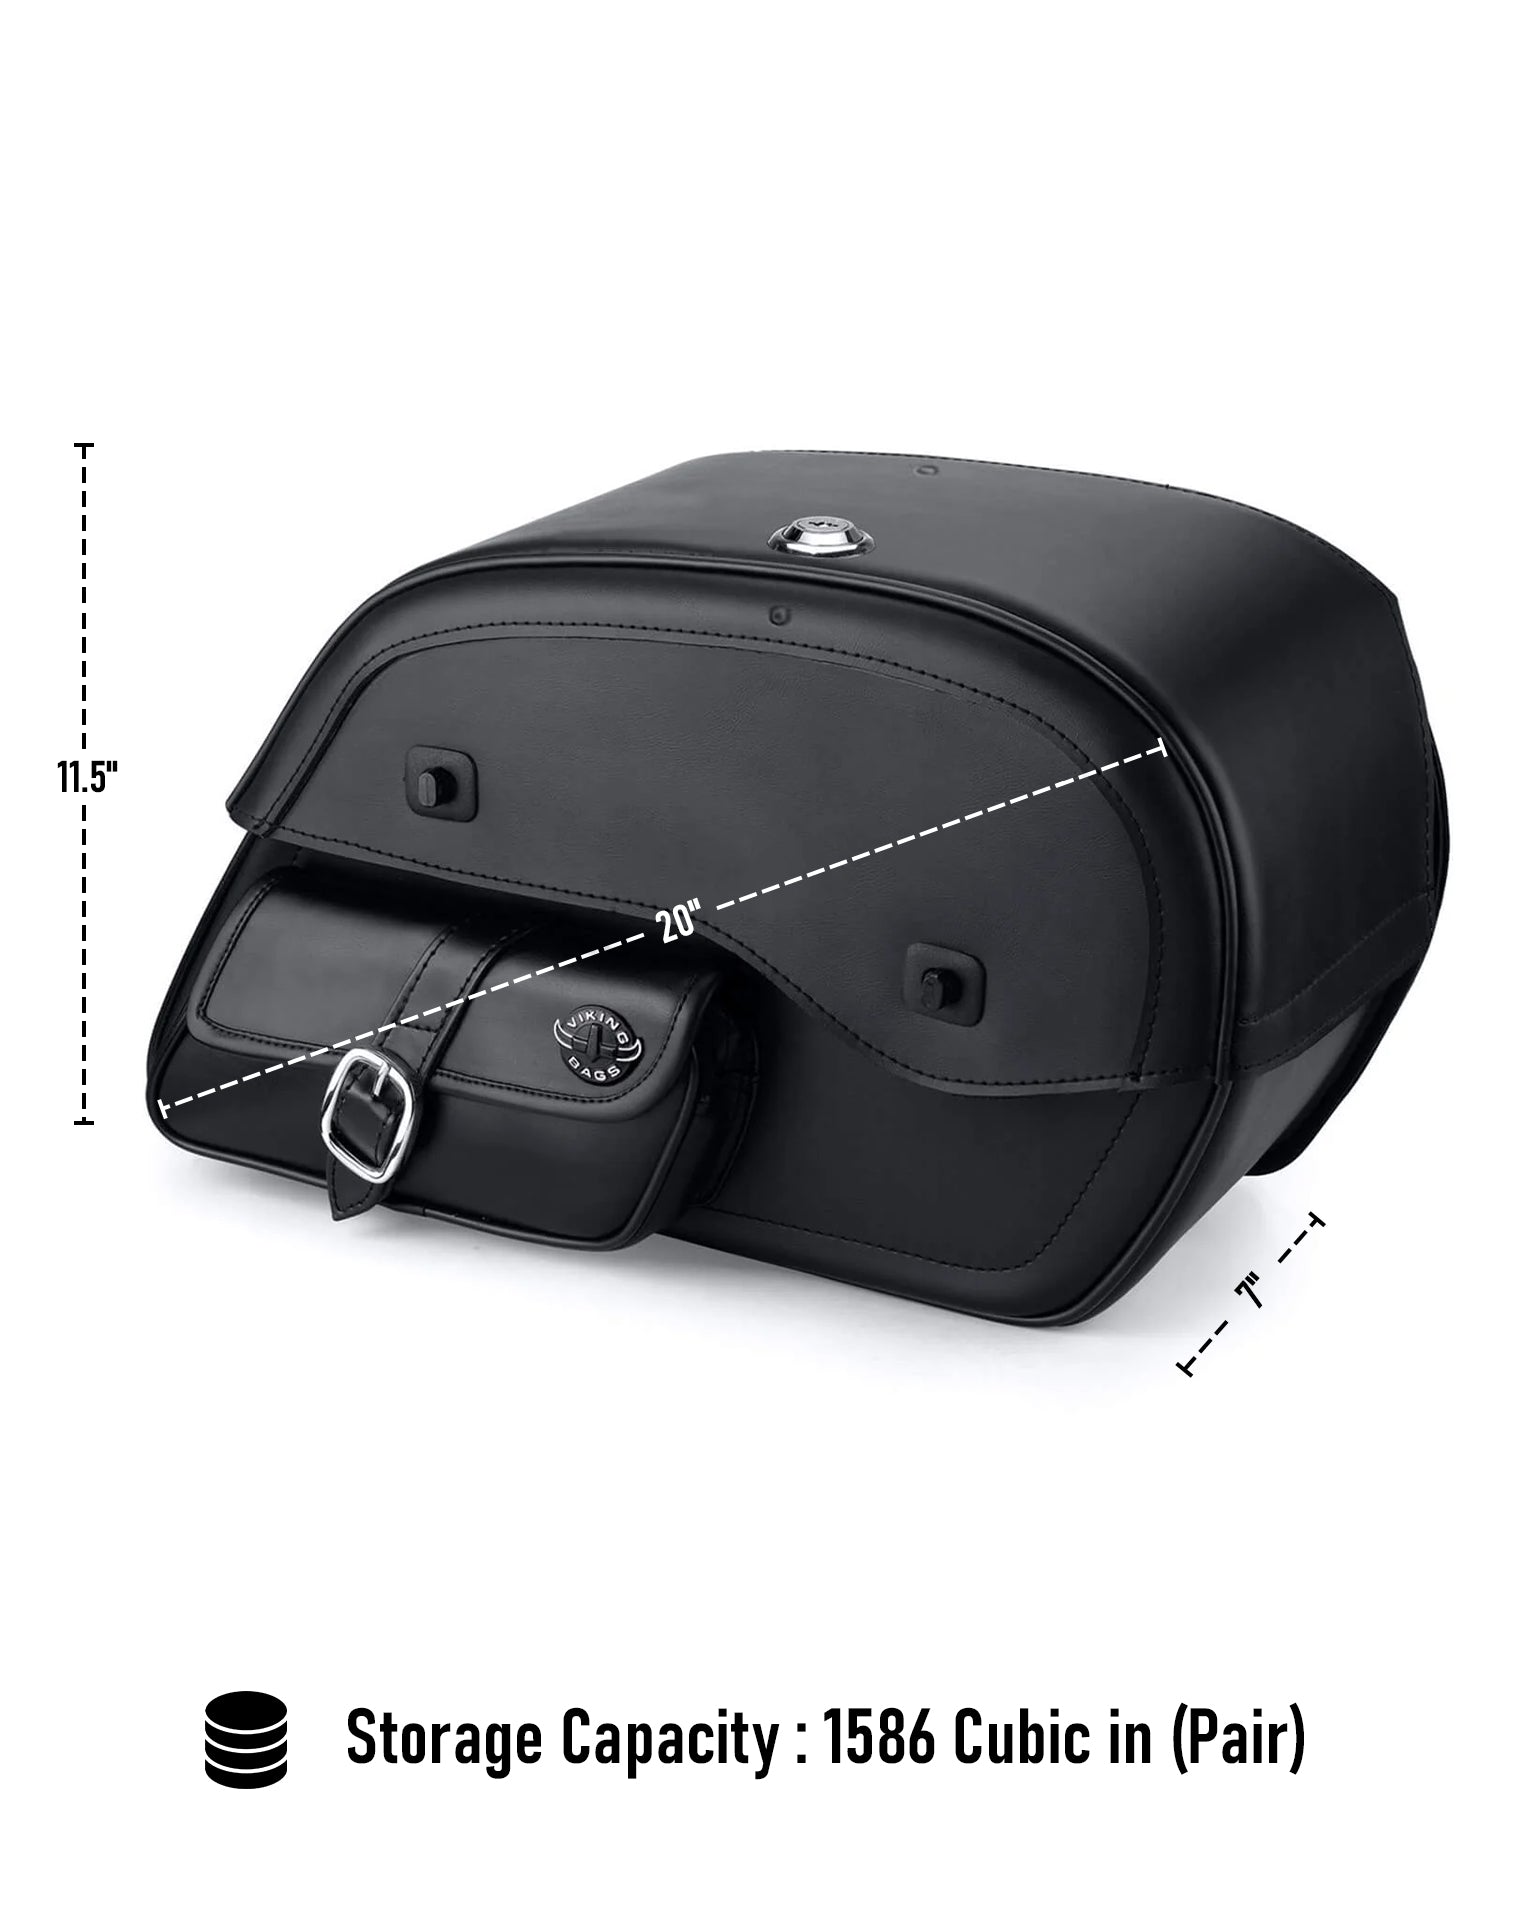 Viking Essential Side Pocket Large Kawasaki Vulcan 1600 Classic Vn1600 Shock Cutout Leather Motorcycle Saddlebags Can Store Your Ridings Gears